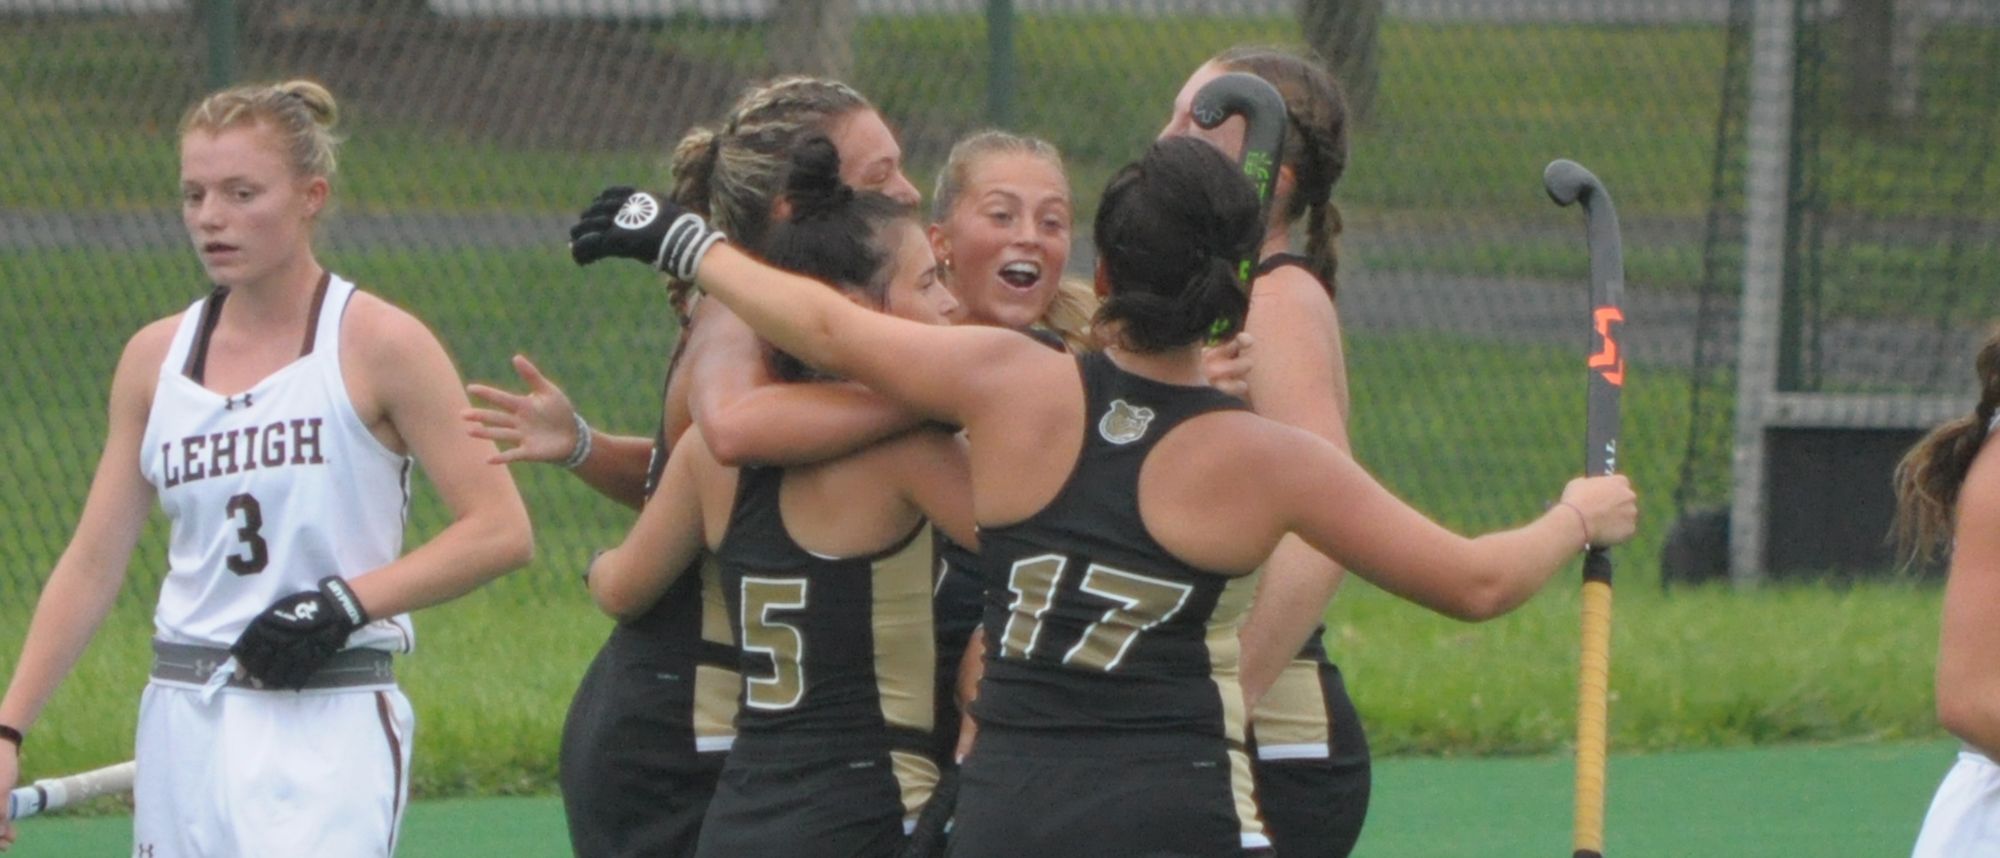 Dennis scores in 3-1 loss to Lehigh